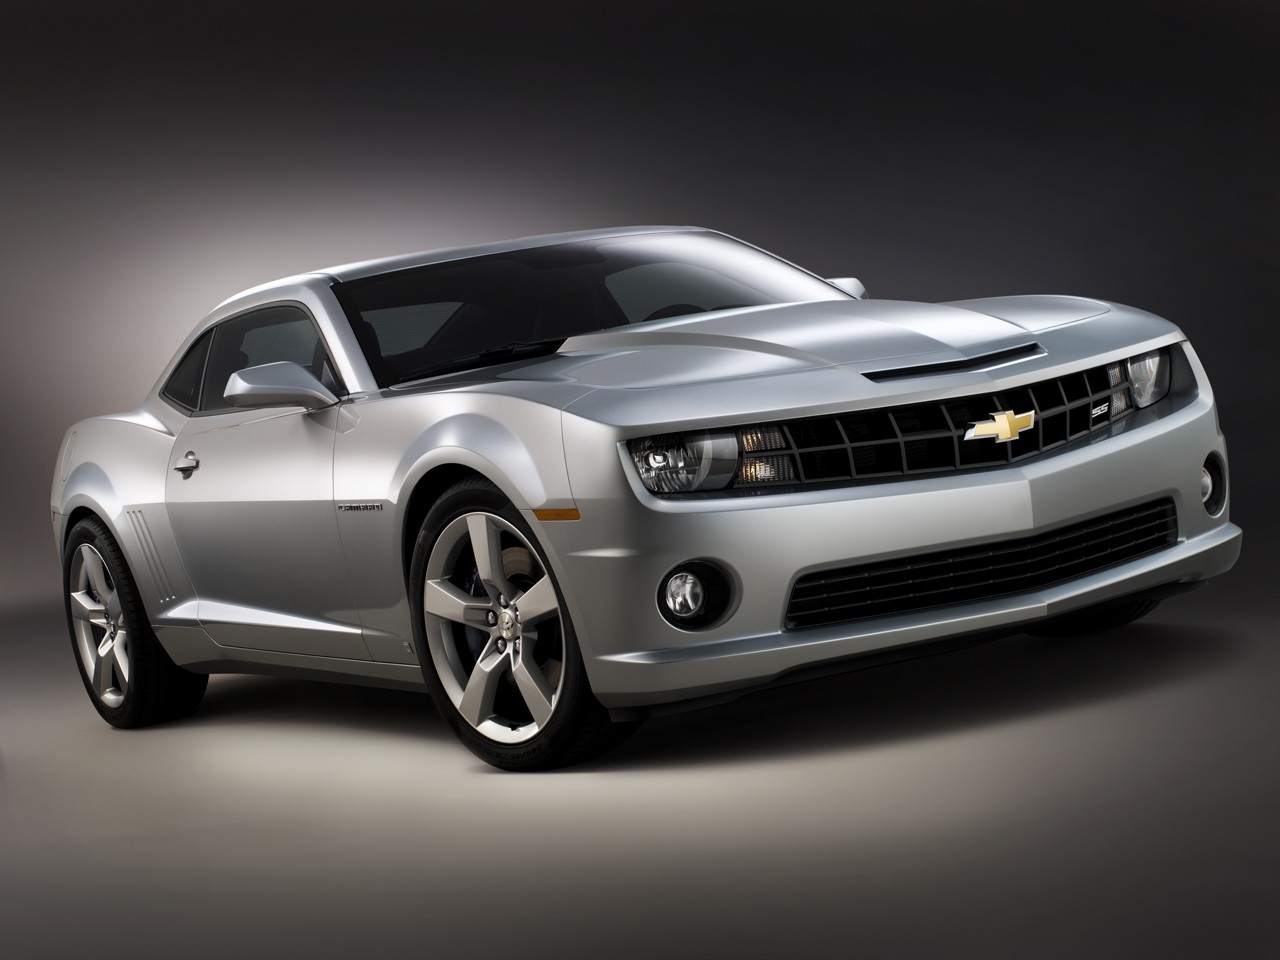 picture of Chevrolet Camaro, 2012, SS, silver